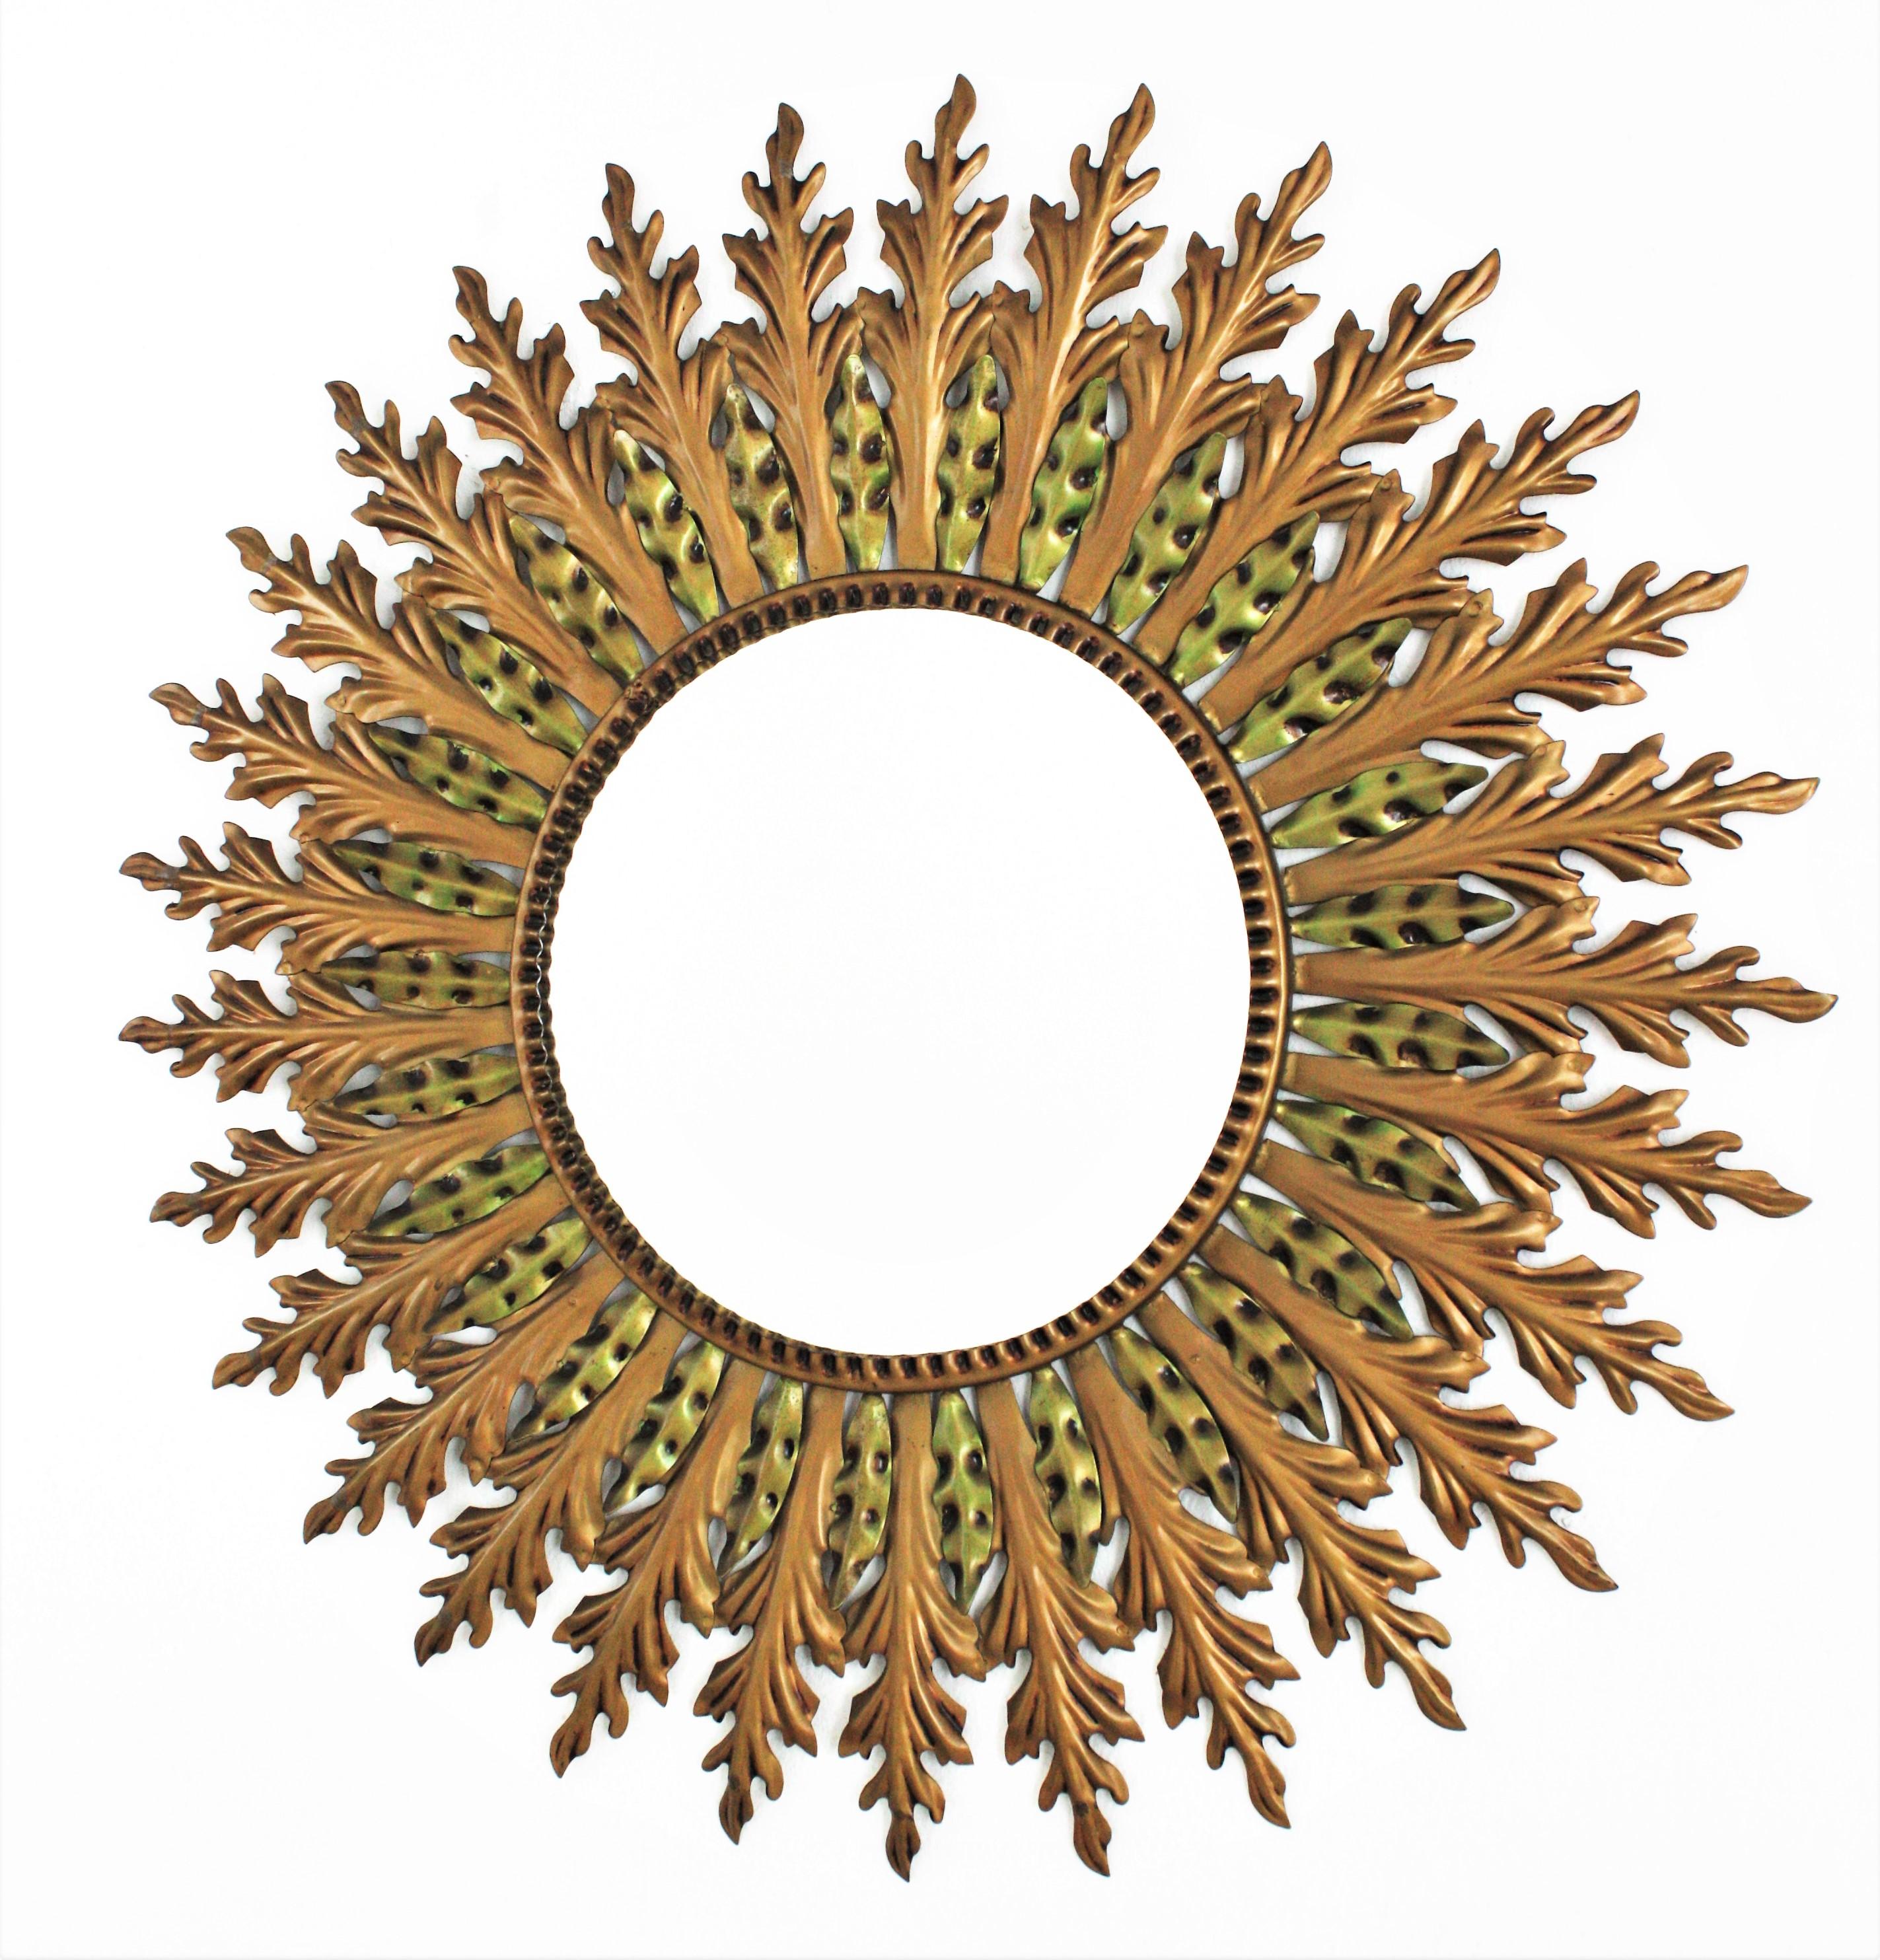 Eye-catching Hollywood Regency gilt metal and green double layered sunburst mirror, Spain, 1960s.
This sunburst wall mirror has a layer of gilt iron large leaves and a layer of small green patinated leaves.
This wall mirror will add a glamorous